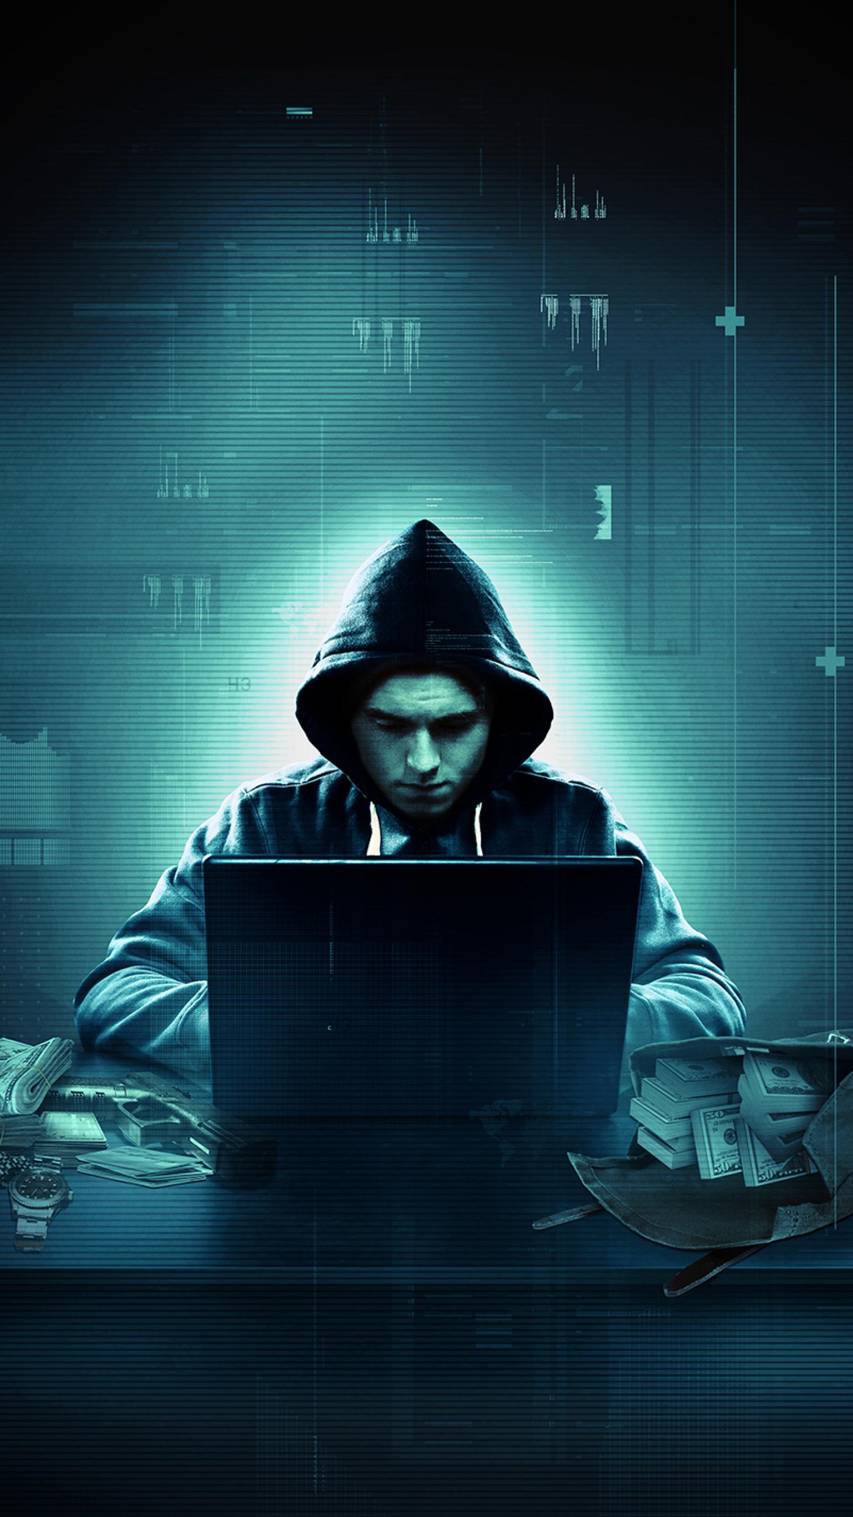 Most Popular Hacker Wallpapers Images